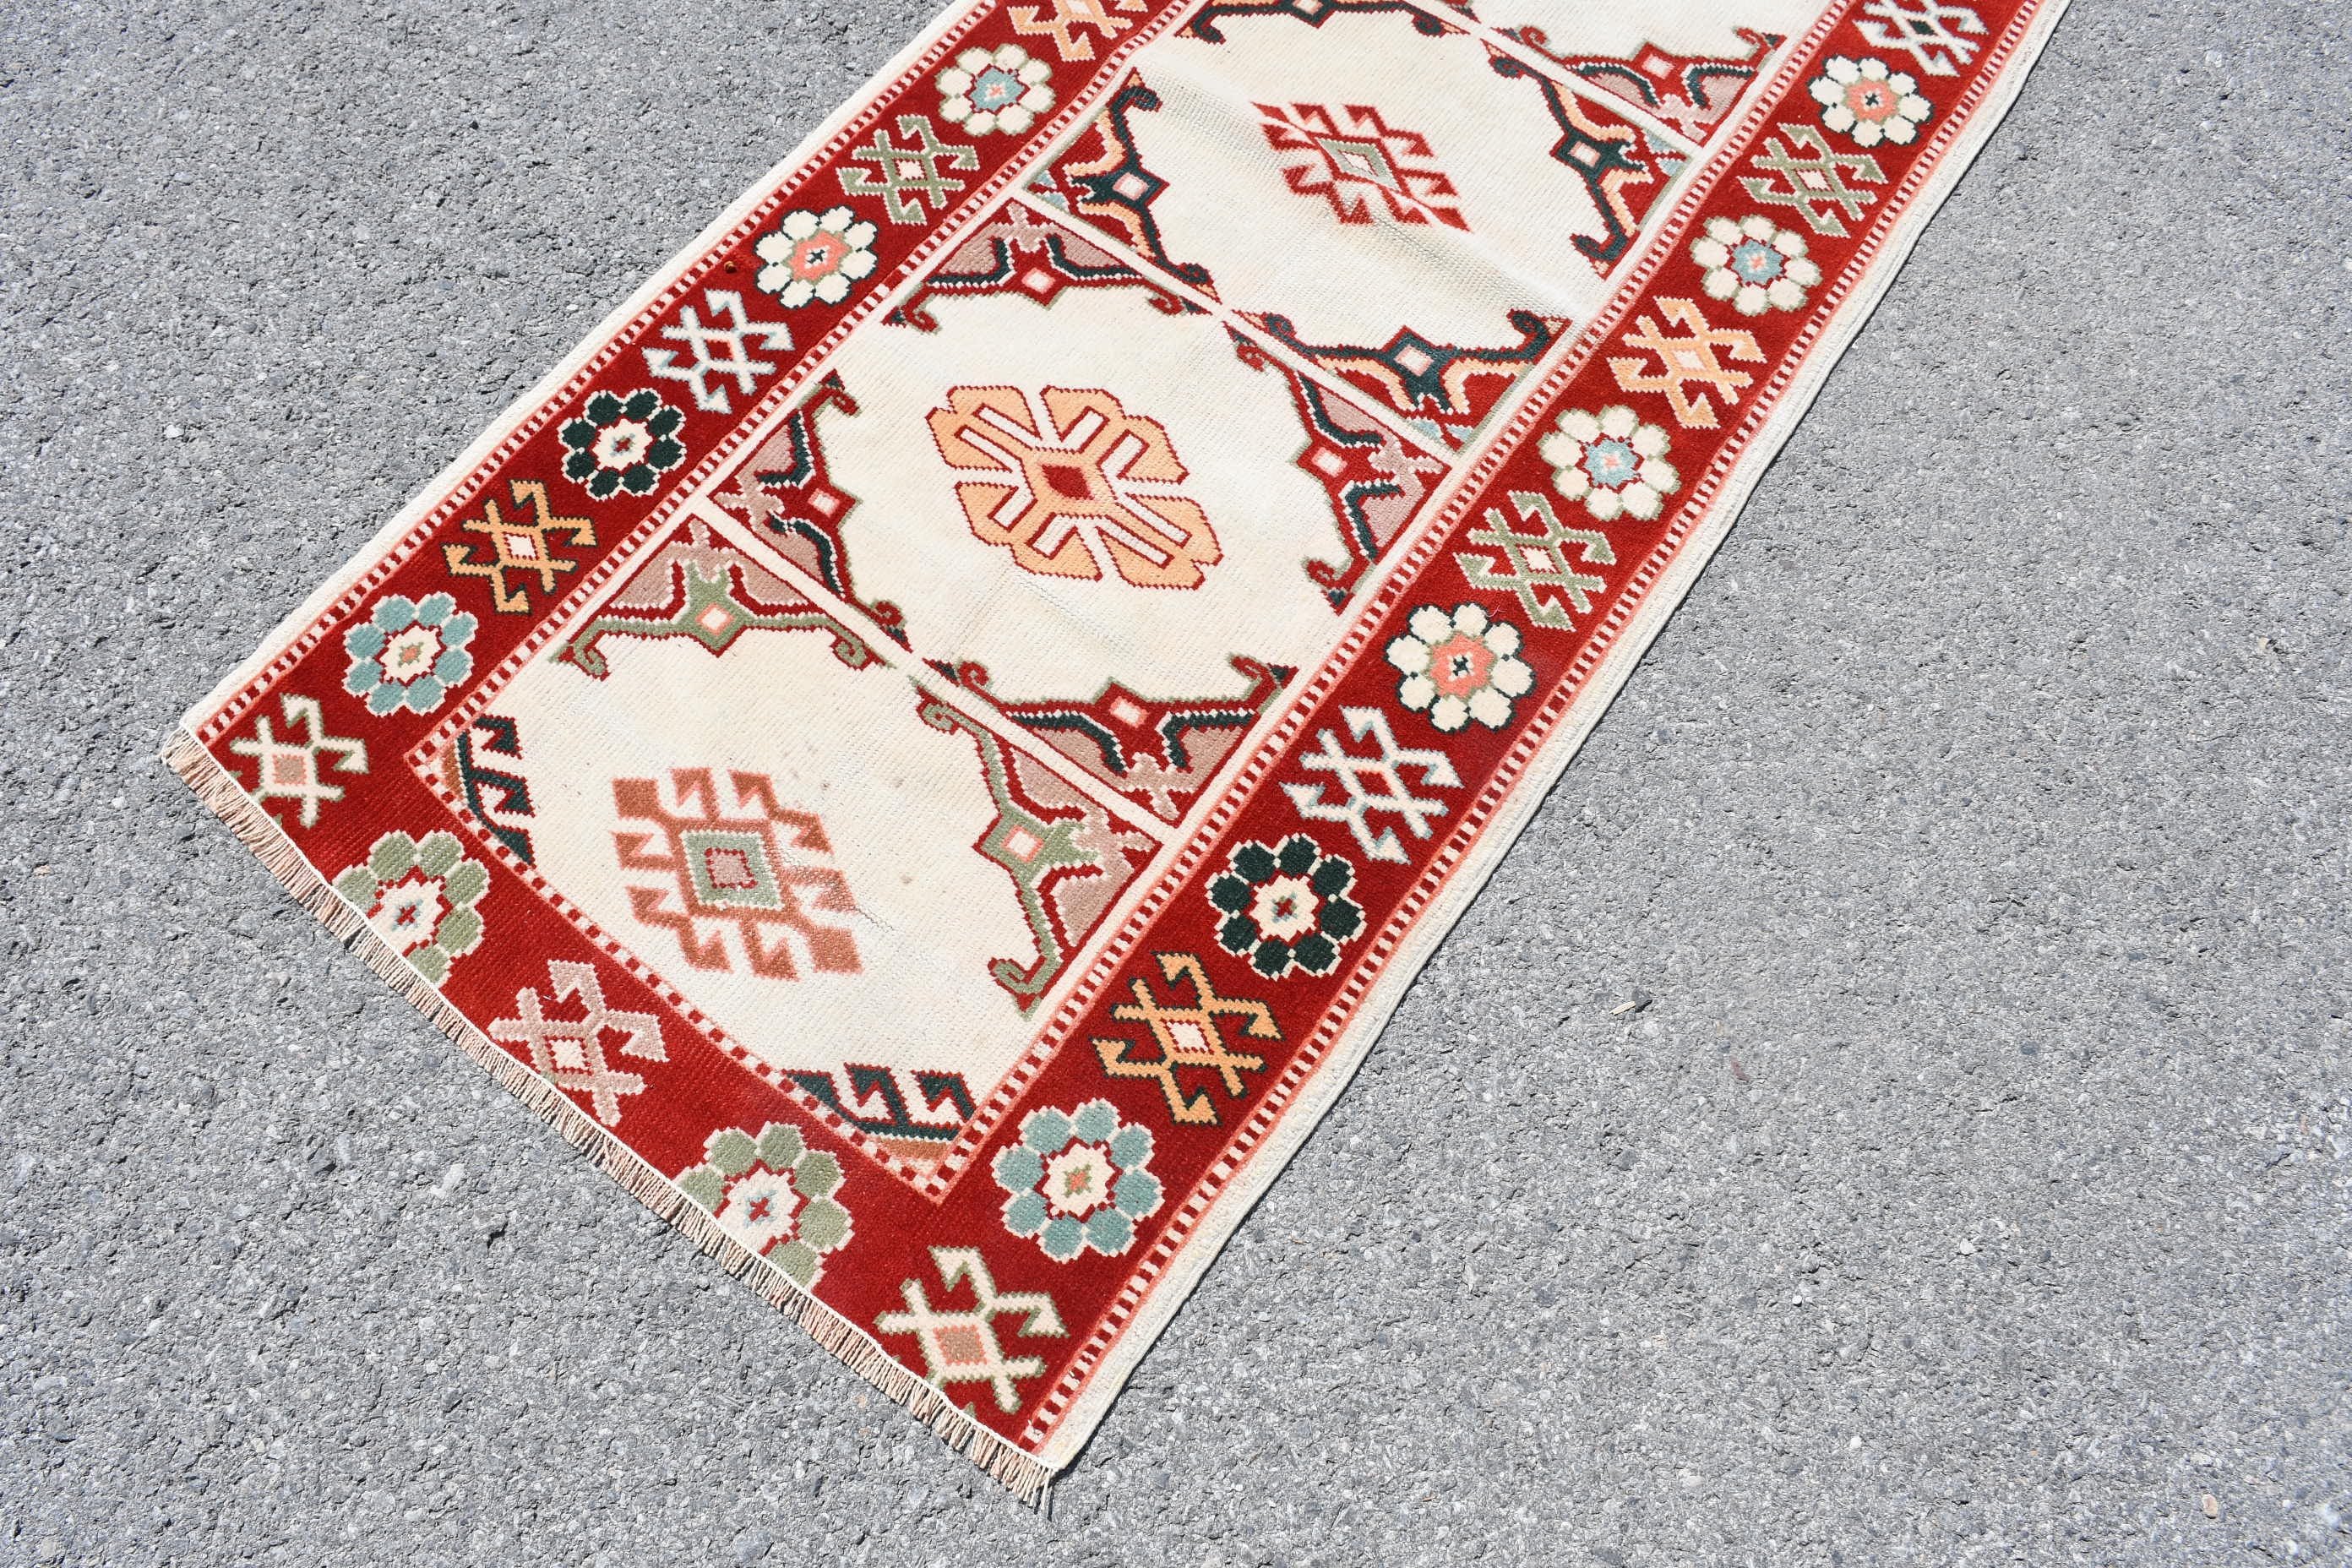 2.6x6.2 ft Accent Rugs, Turkey Rugs, Vintage Rugs, Rugs for Entry, Turkish Rug, Red Oriental Rug, Entry Rug, Bedroom Rug, Oushak Rug